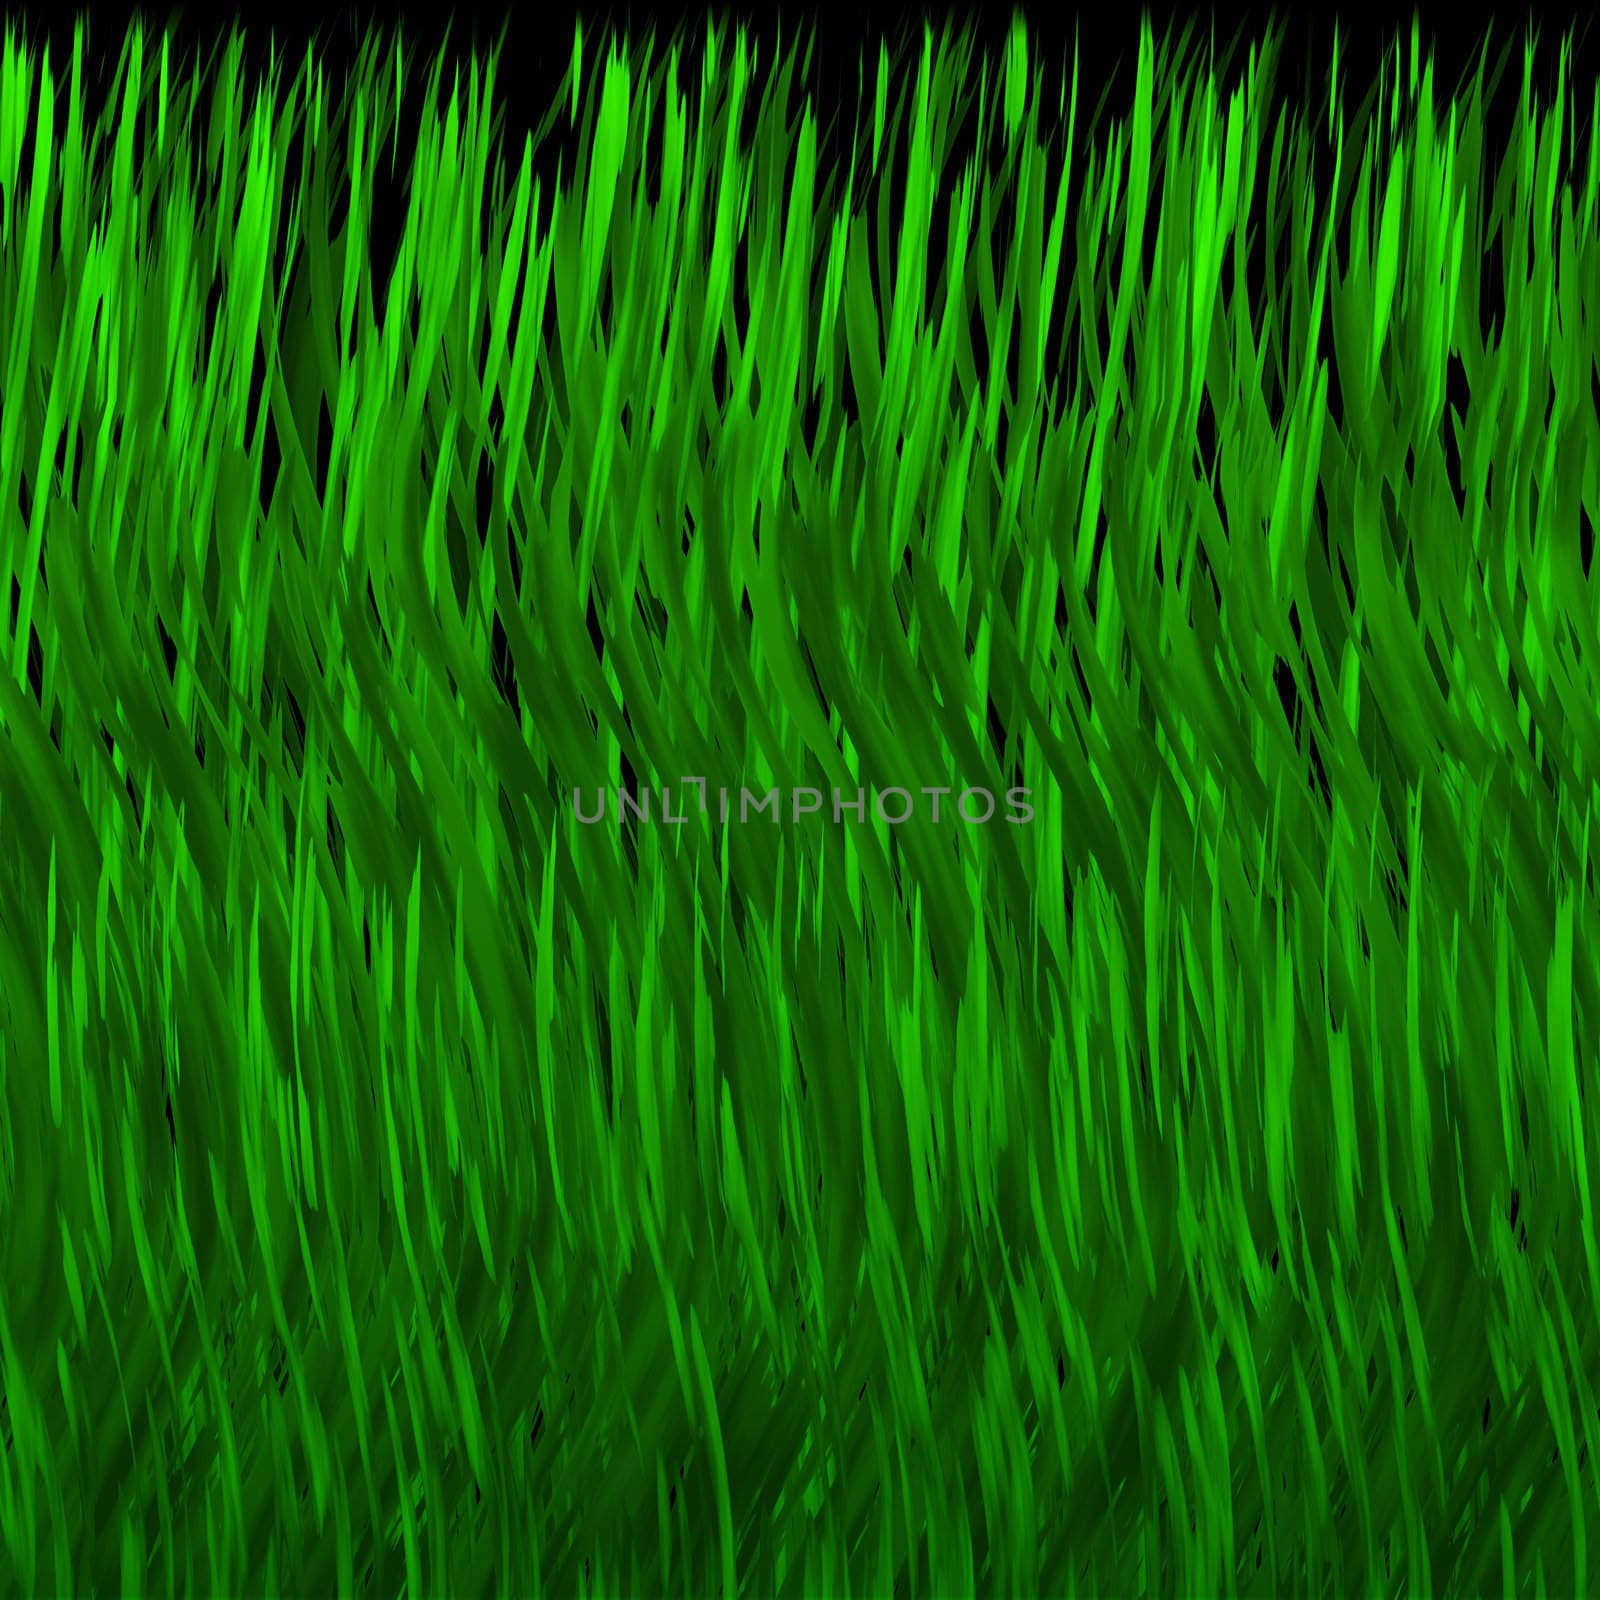 hsl painted grass by hospitalera